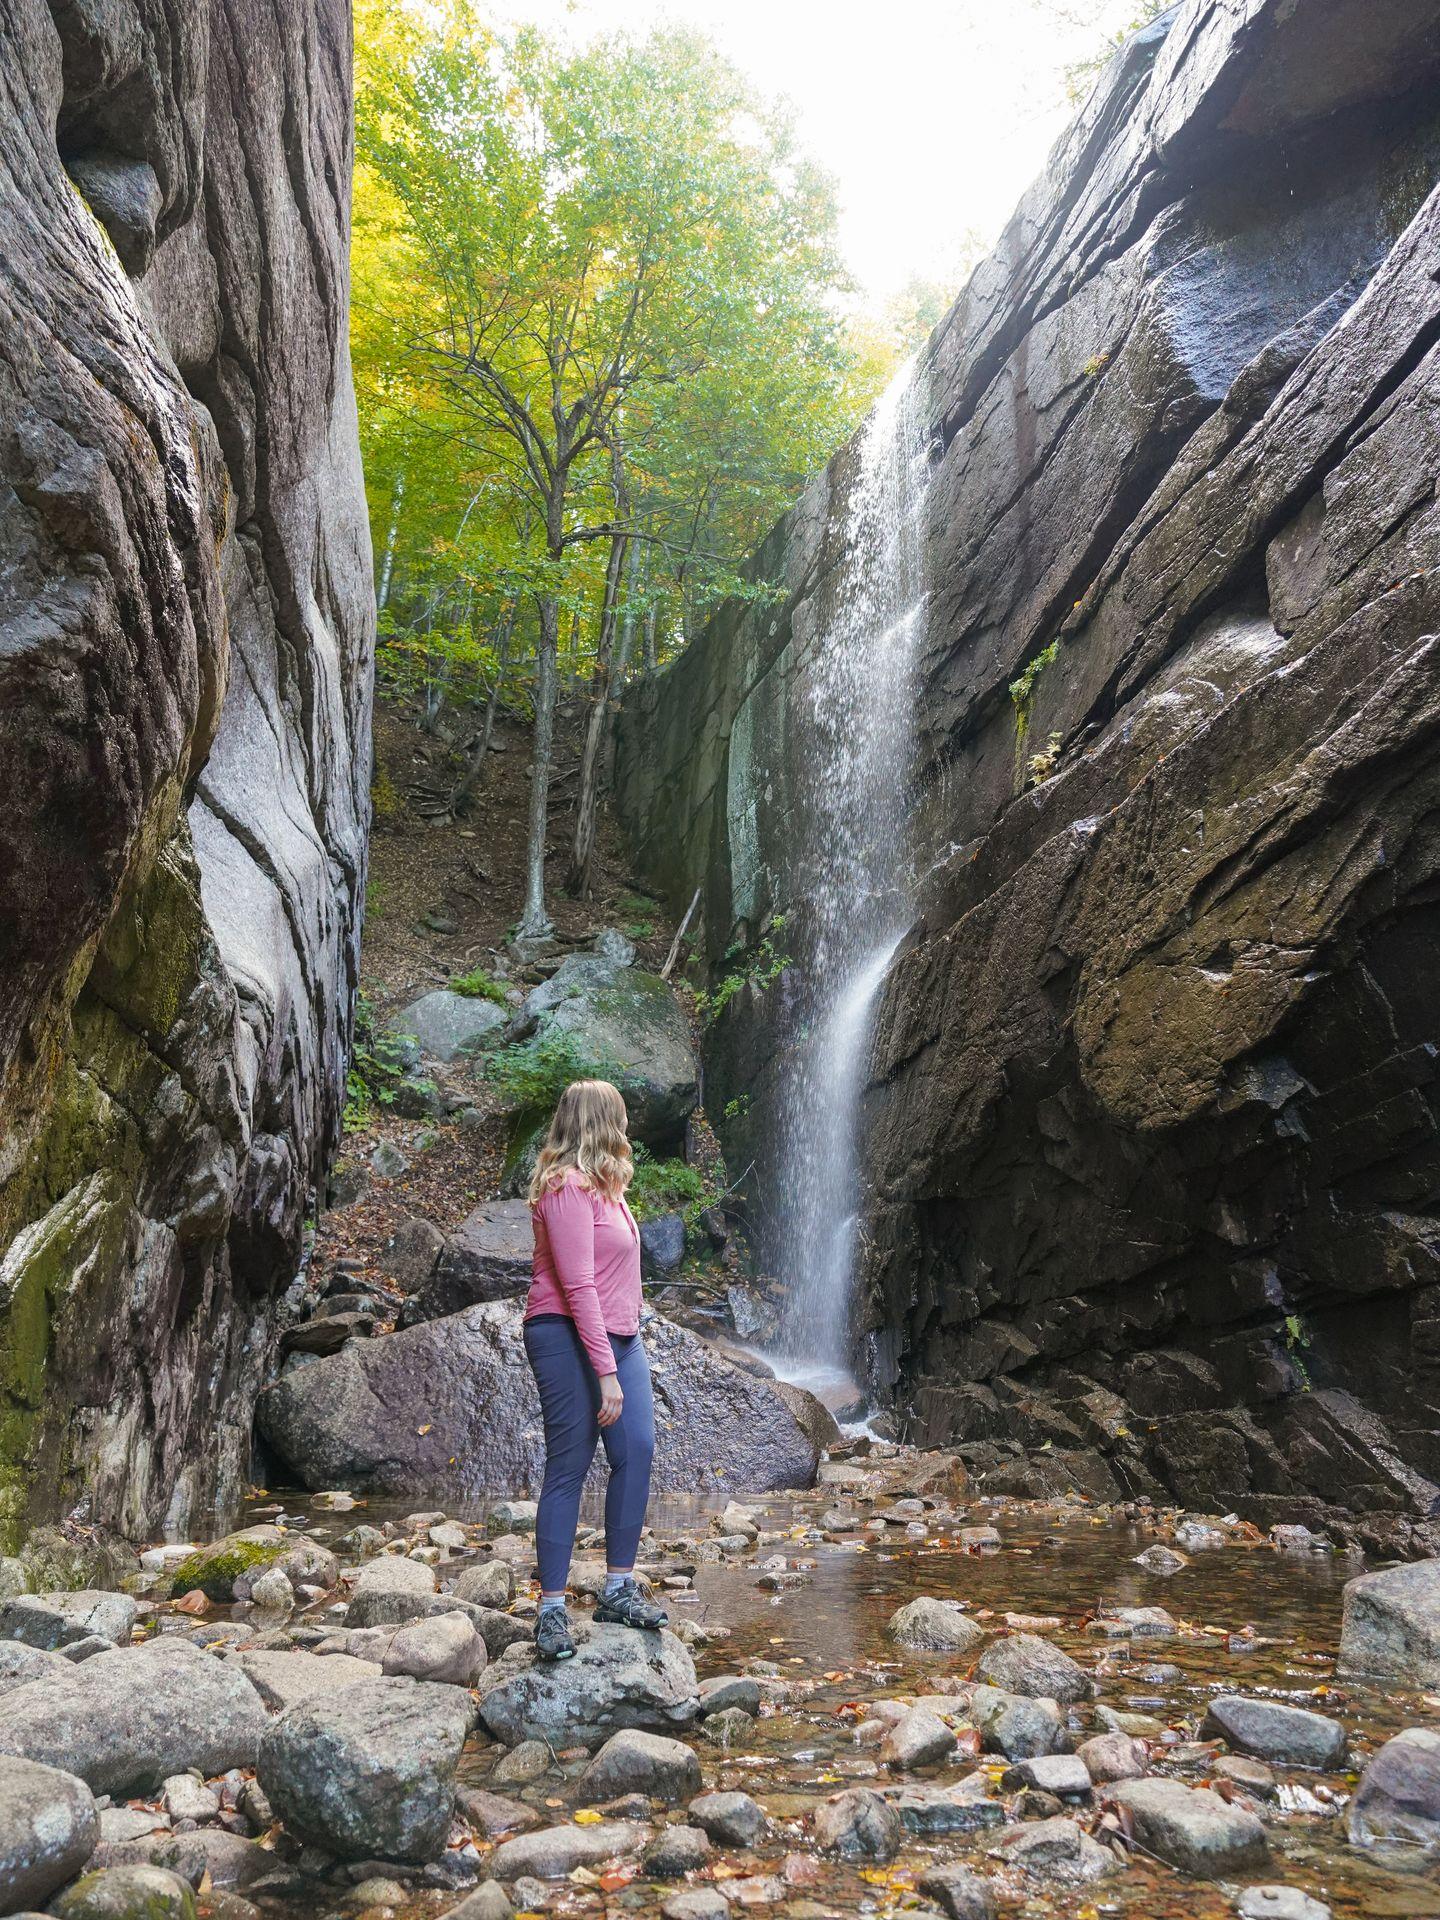 Lydia standing and looking back at Champney Falls, a tall waterfall coming from a tall, flat rock face.